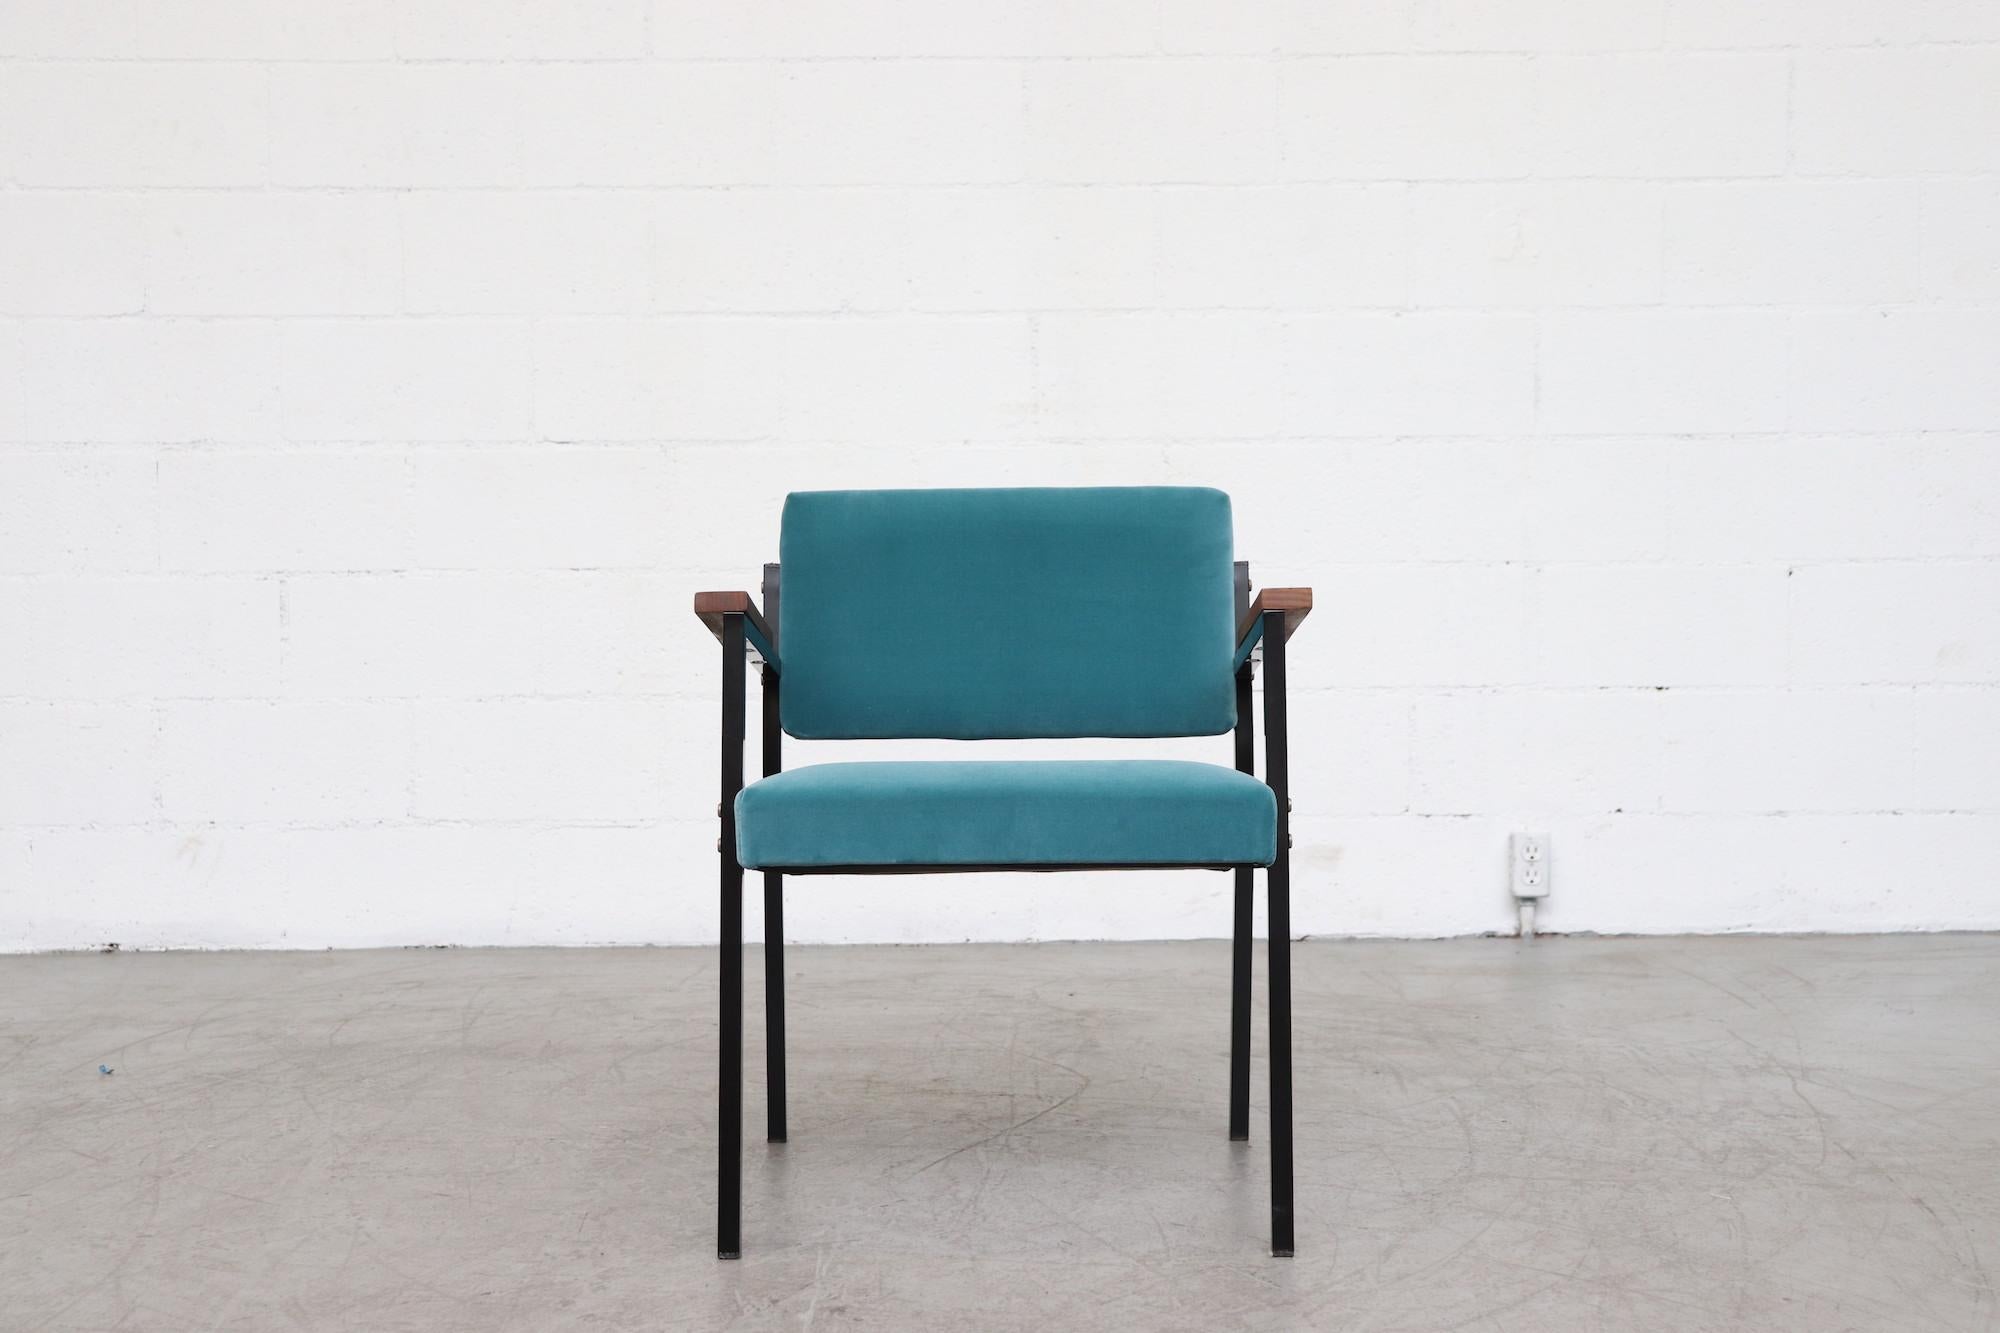 Pair of newly upholstered Martin Visser style velvet lounge chairs. With newly powder-coated black metal frames and solid teak arm rests. In good original condition with minimal visible signs of wear. Sold as pair. Sets available in aqua, cobalt and